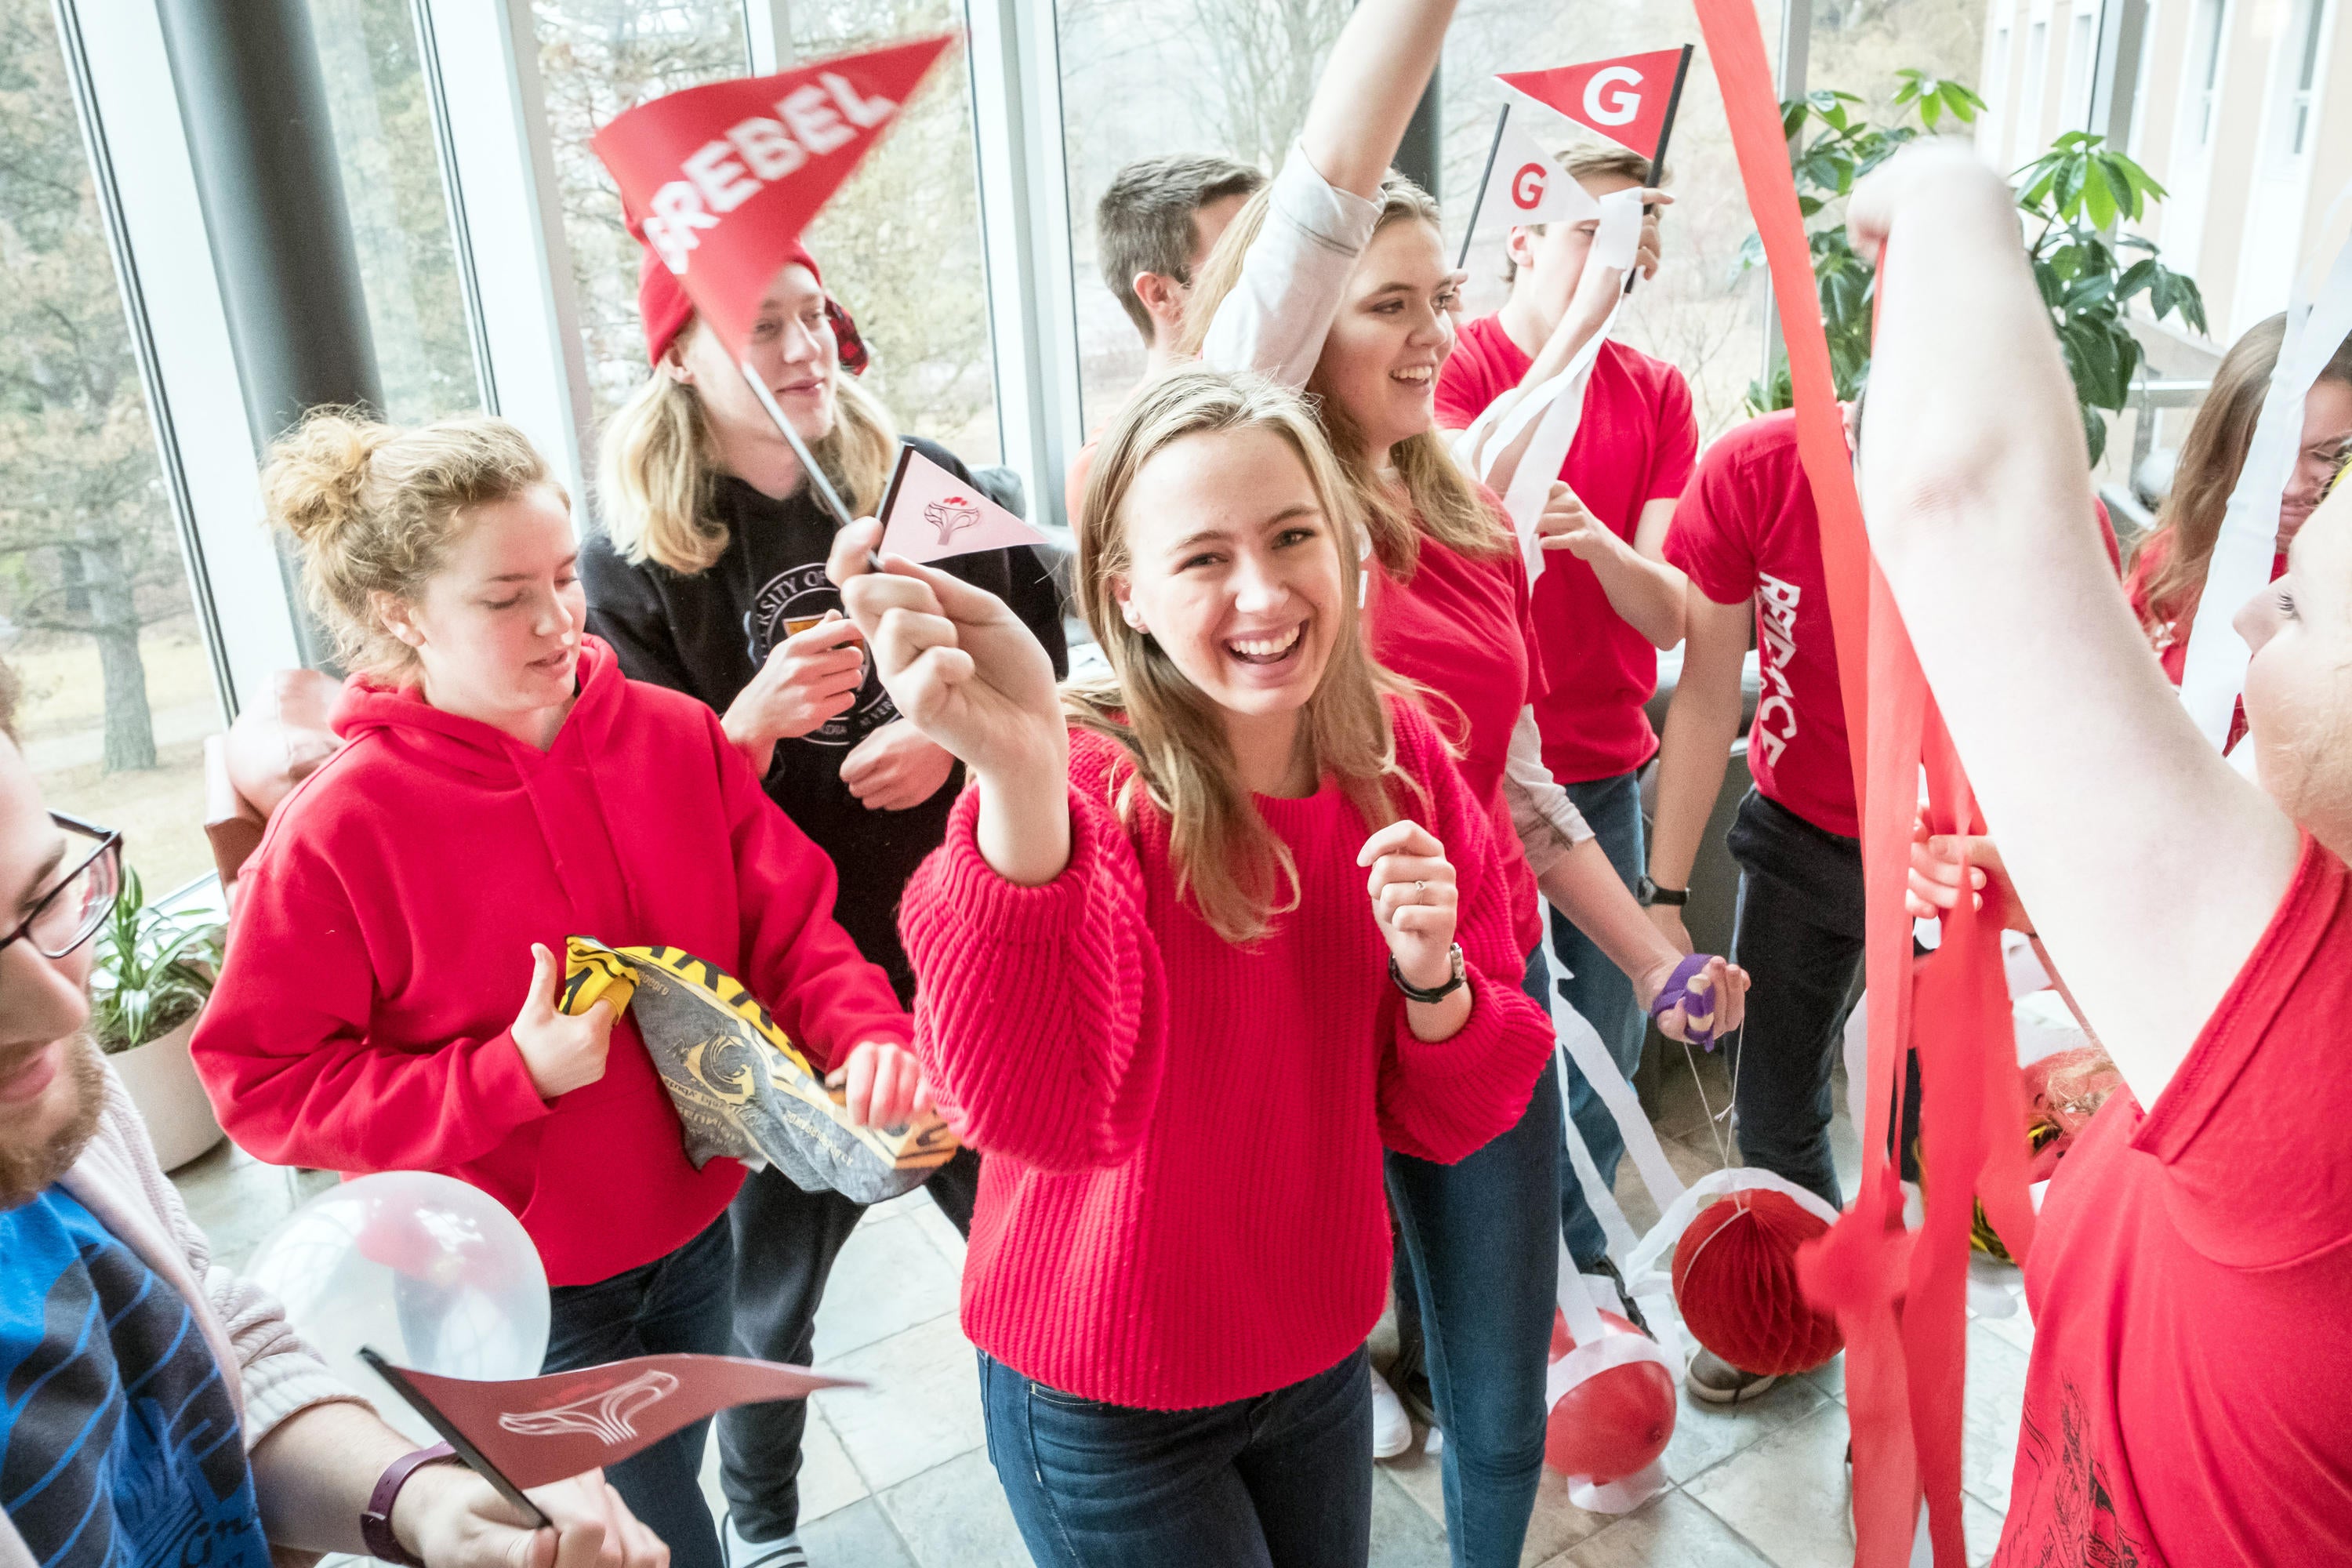 Grebel Students all waring red. Dancing and having fun while showing Grebel pride! 